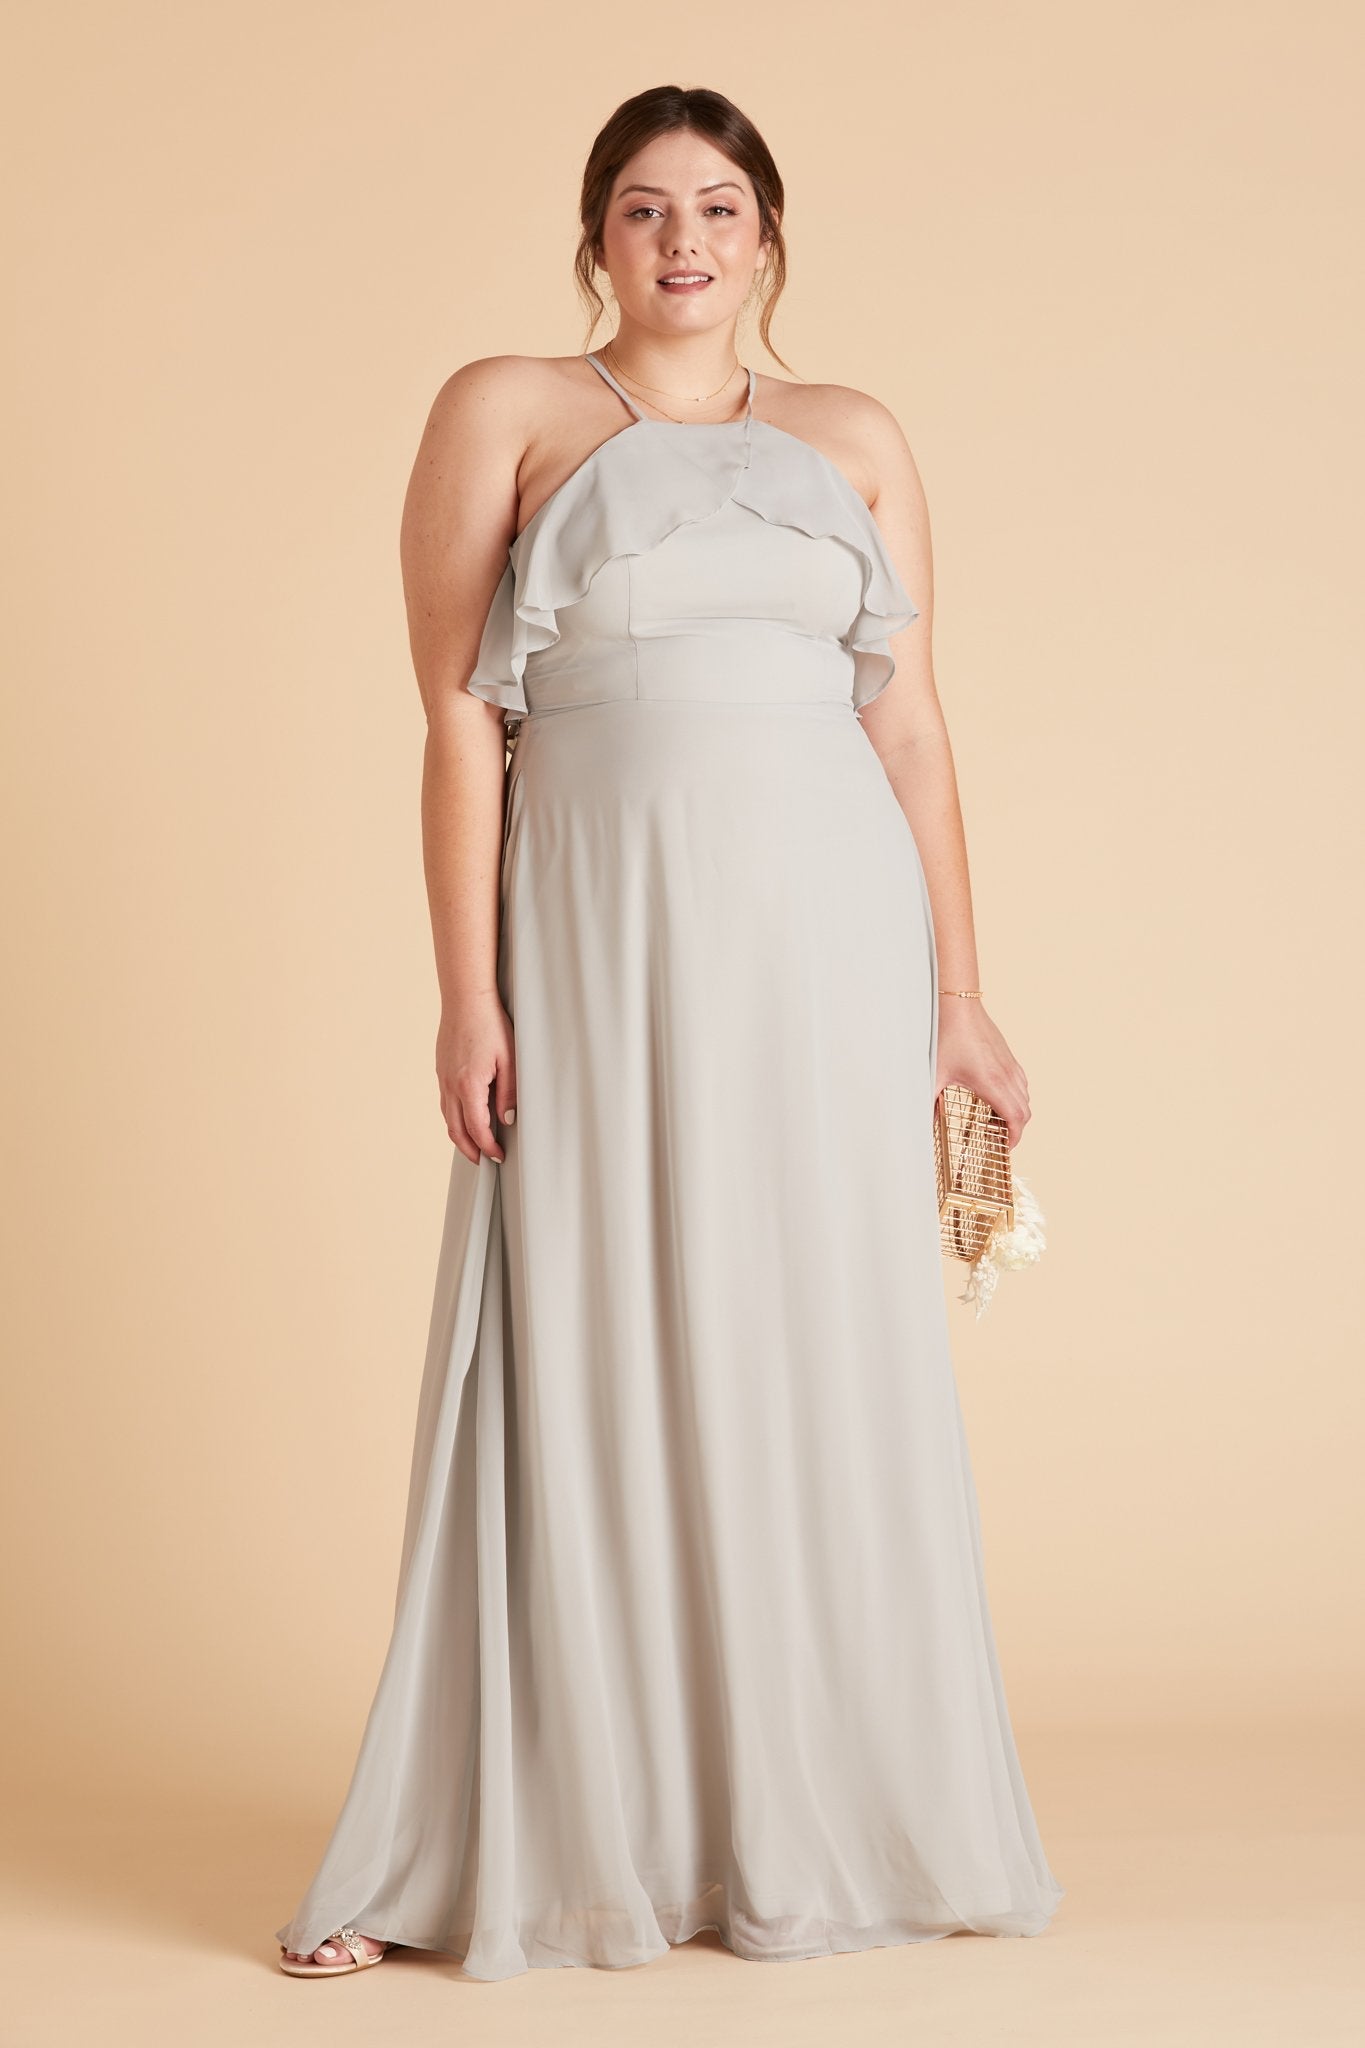 Jules plus size bridesmaid dress in dove gray chiffon by Birdy Grey, front view